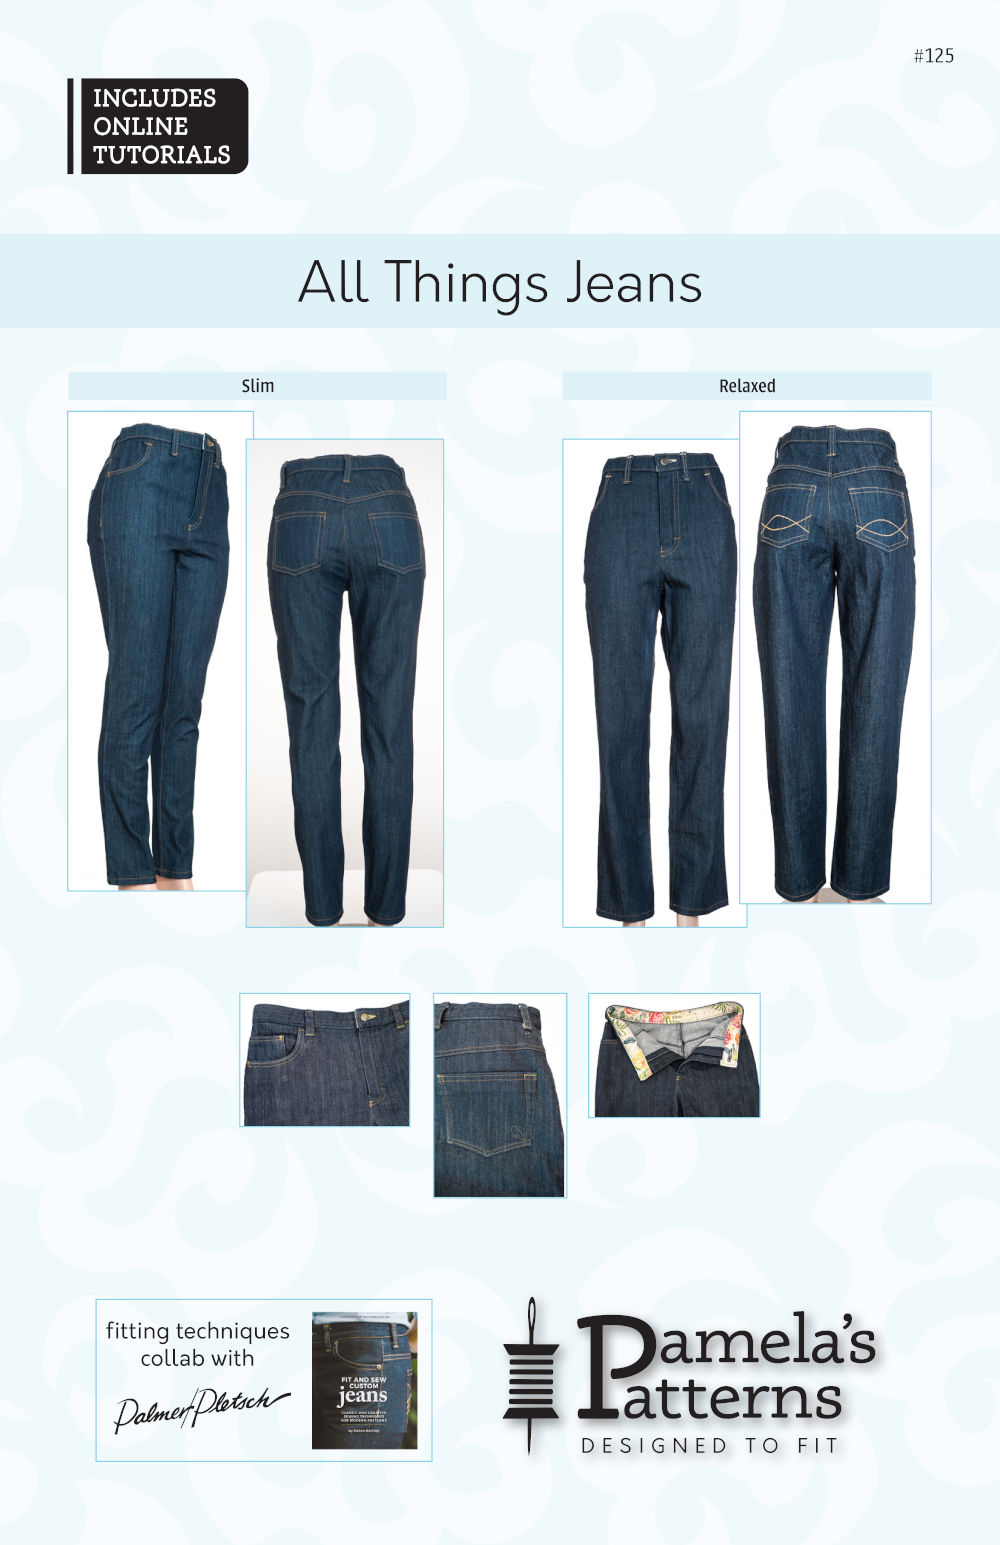 #125 All Things Jeans